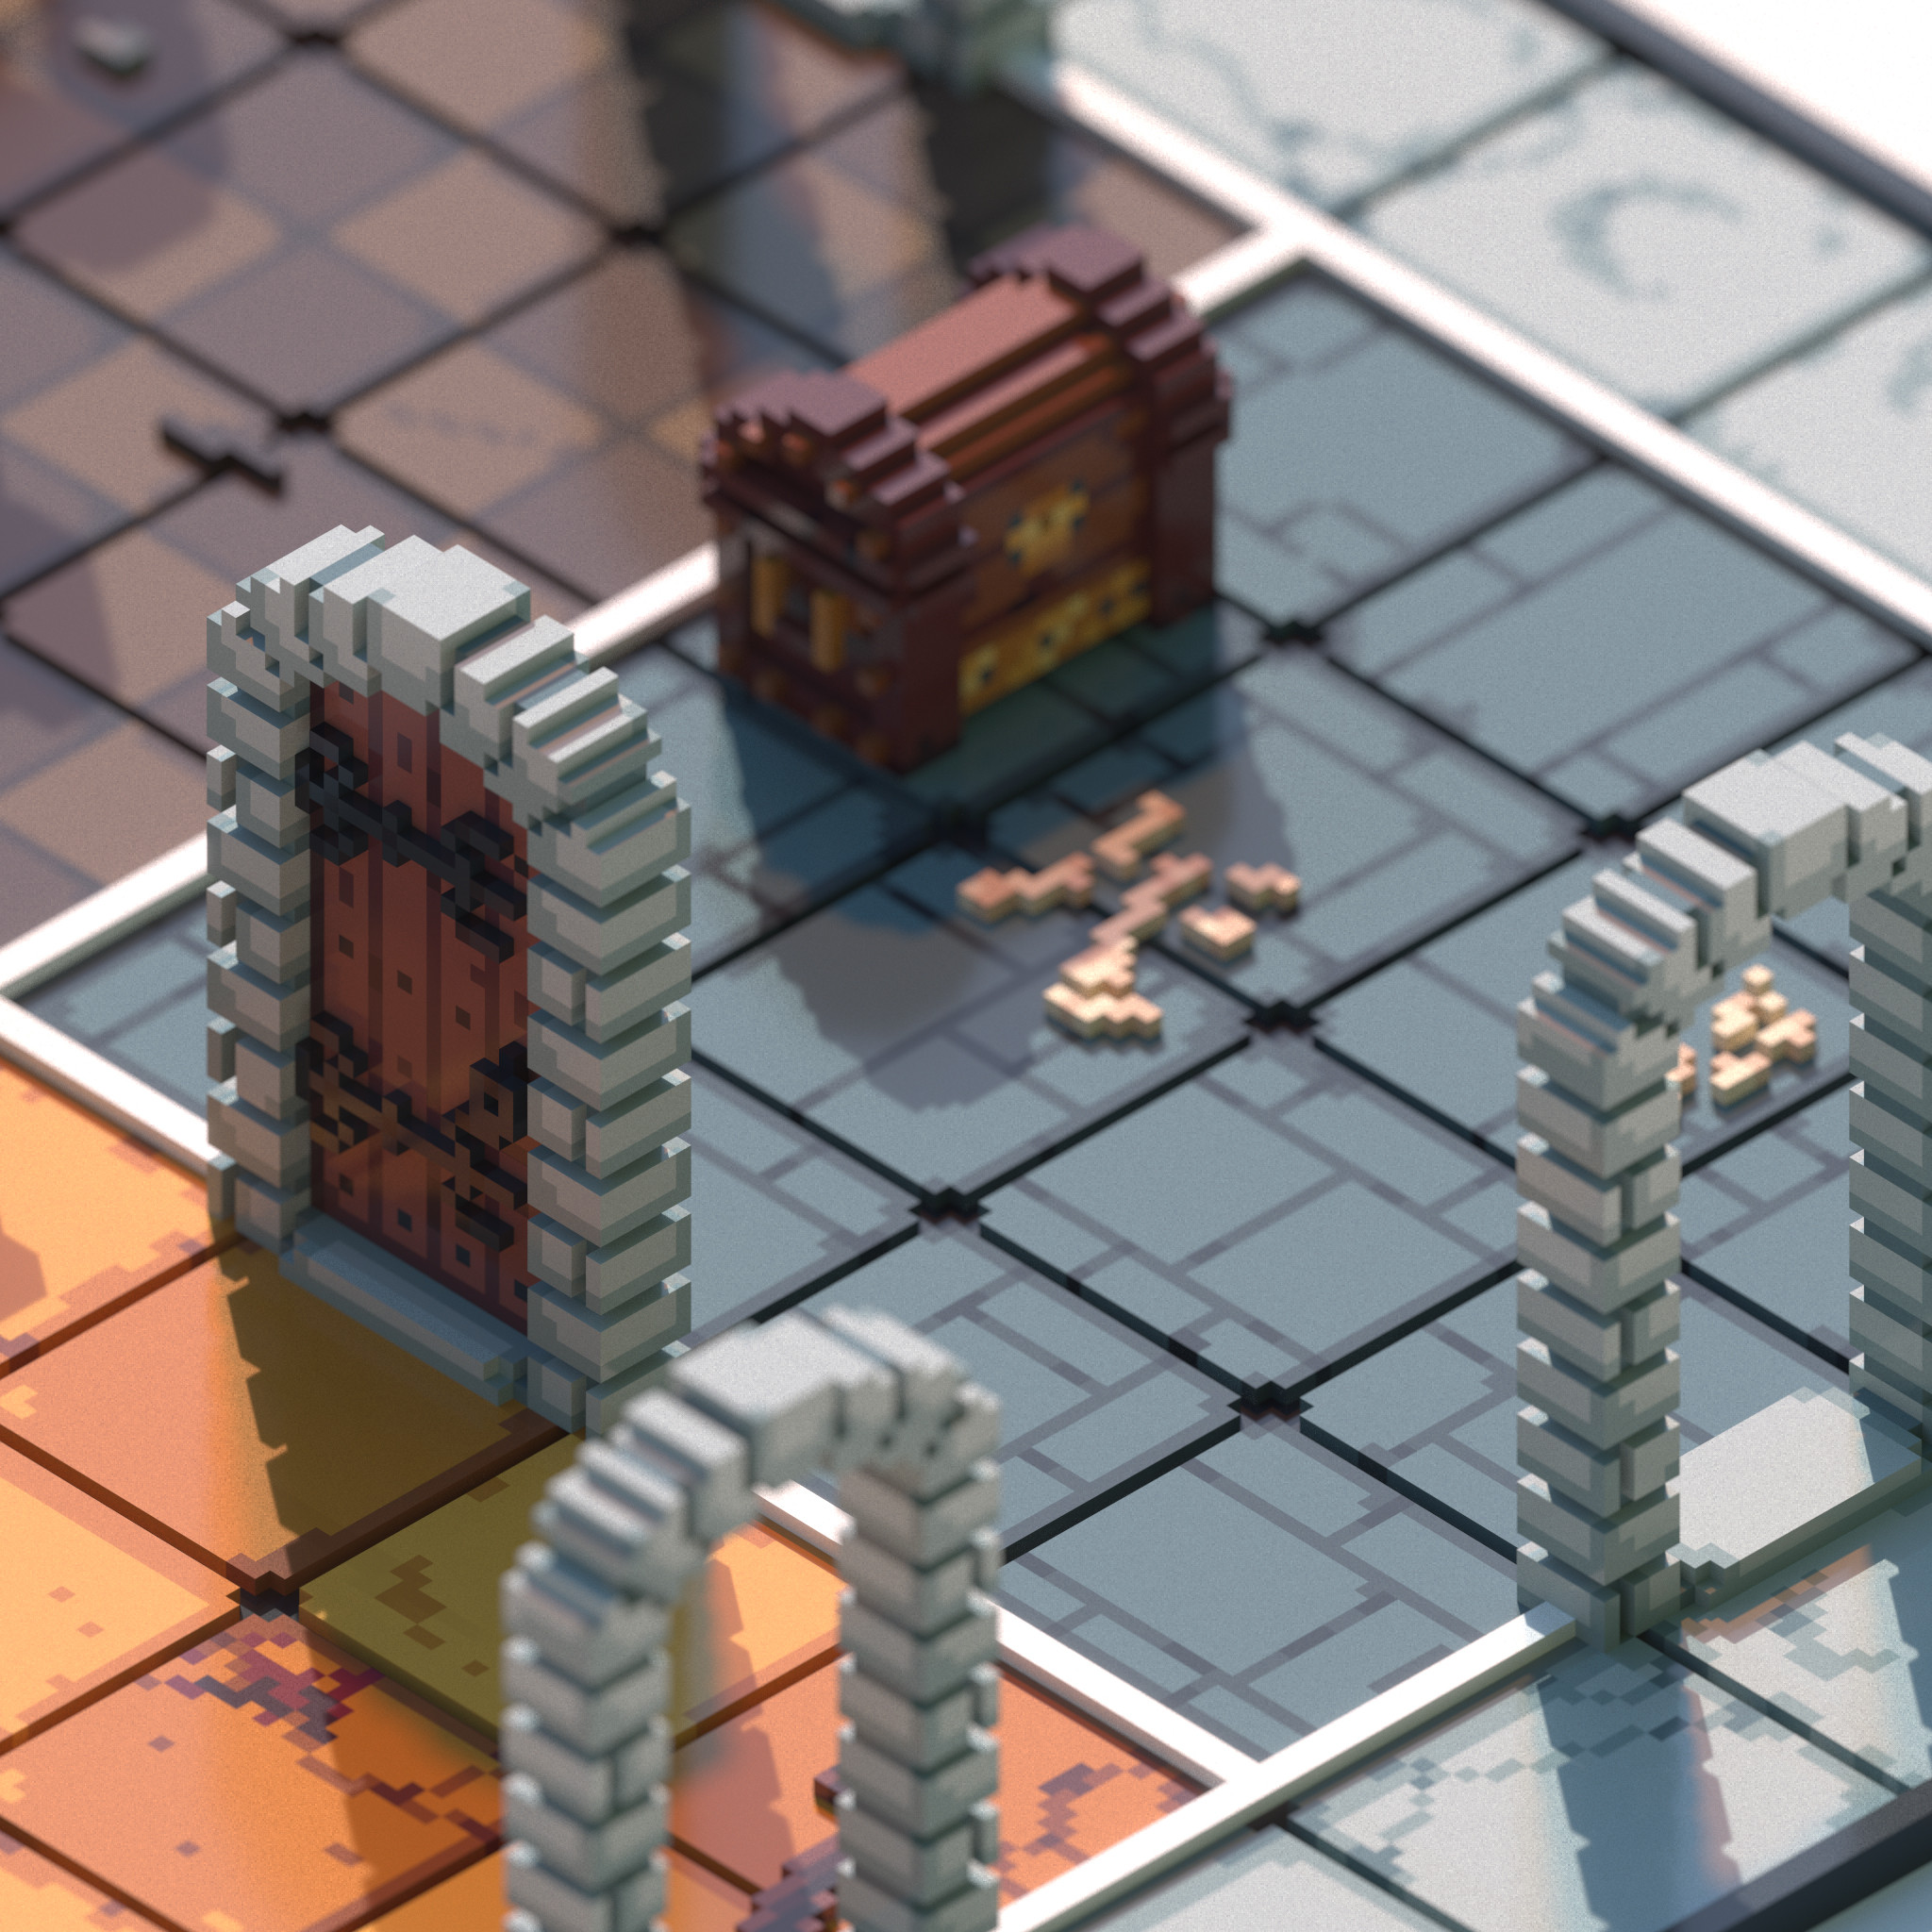 Overhead angle of the HeroQuest game board, with a focus placed on the closed wooden door and nearby treasure chest set pieces.